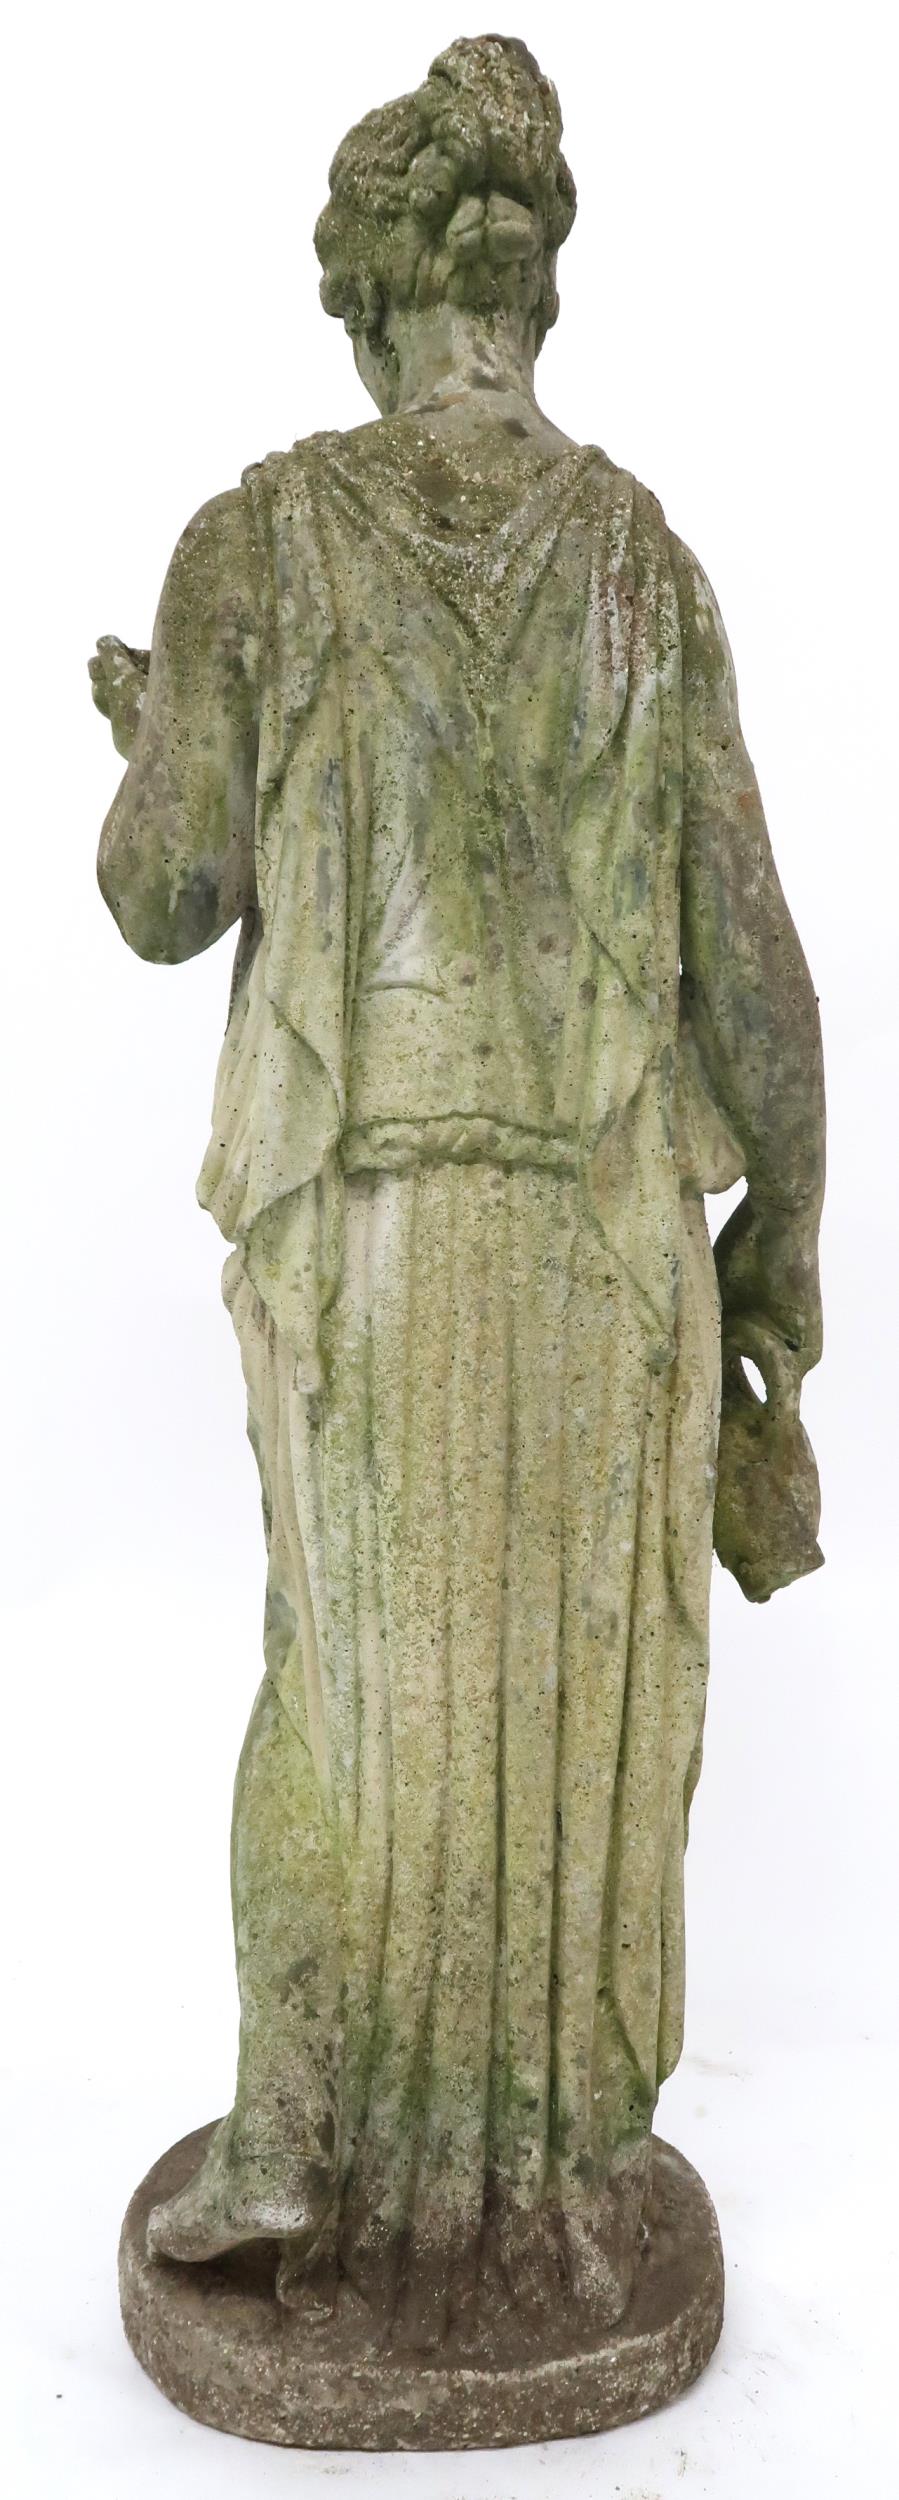 A 20th century reconstituted stone garden statue of a classical lady in toga carrying jug and - Image 3 of 3